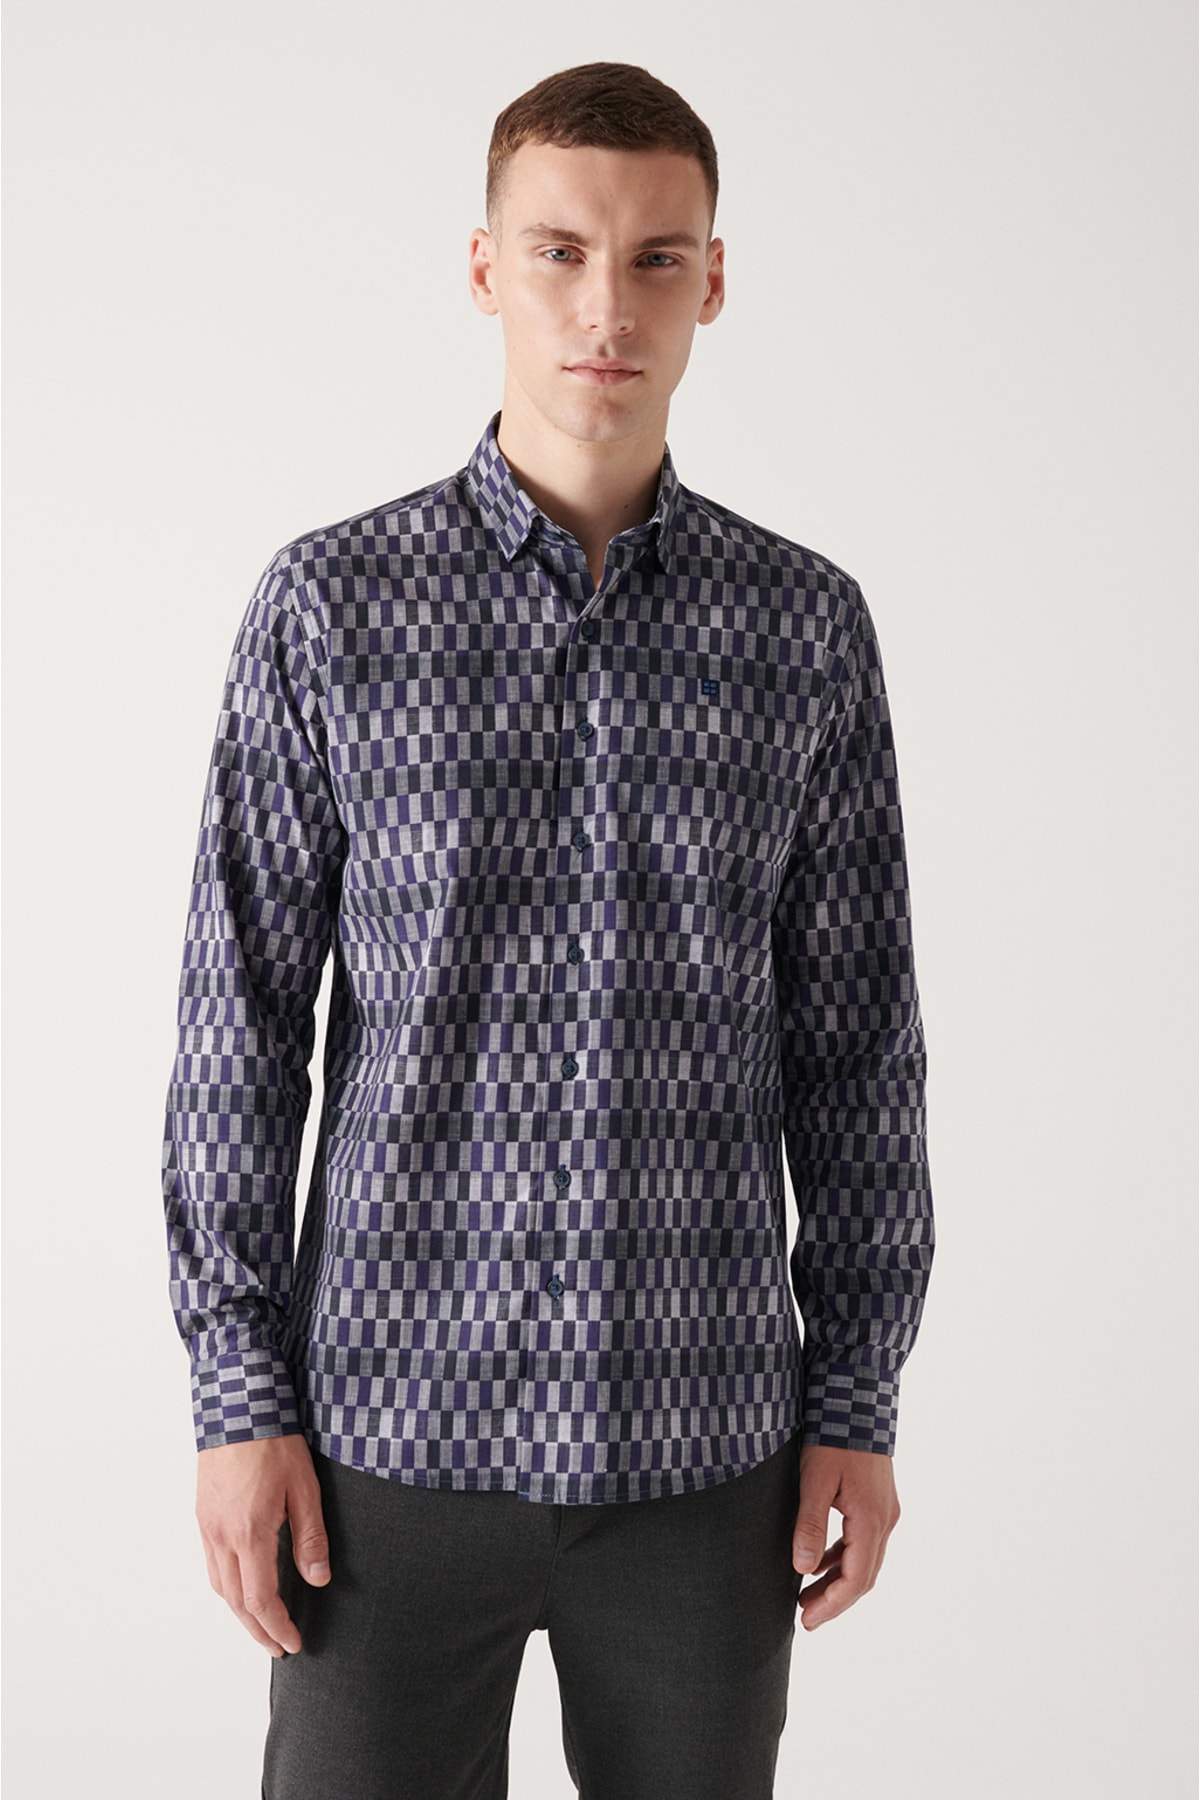 mens-navy-blue-abstract-patterned-shirt-a22y2005